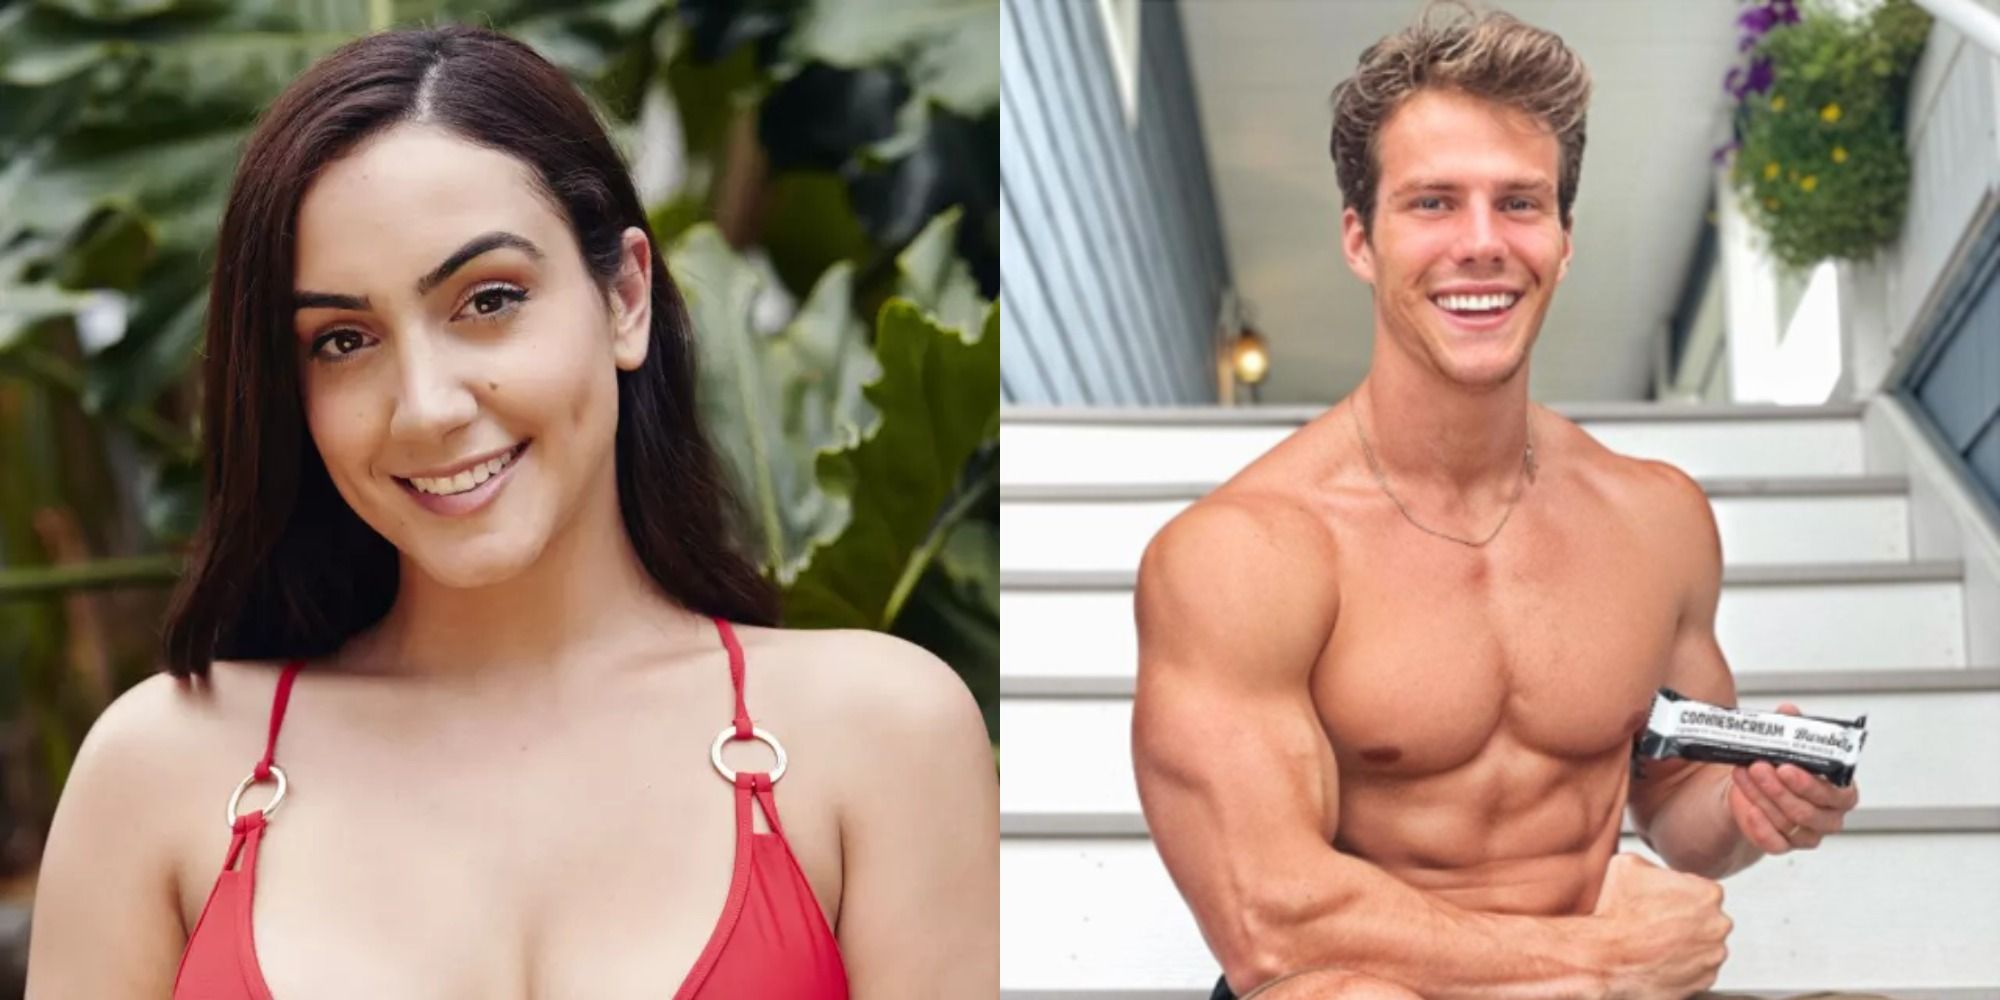 Split image showing Maria Elizondo and Michael Dean Johnson from Are You The One